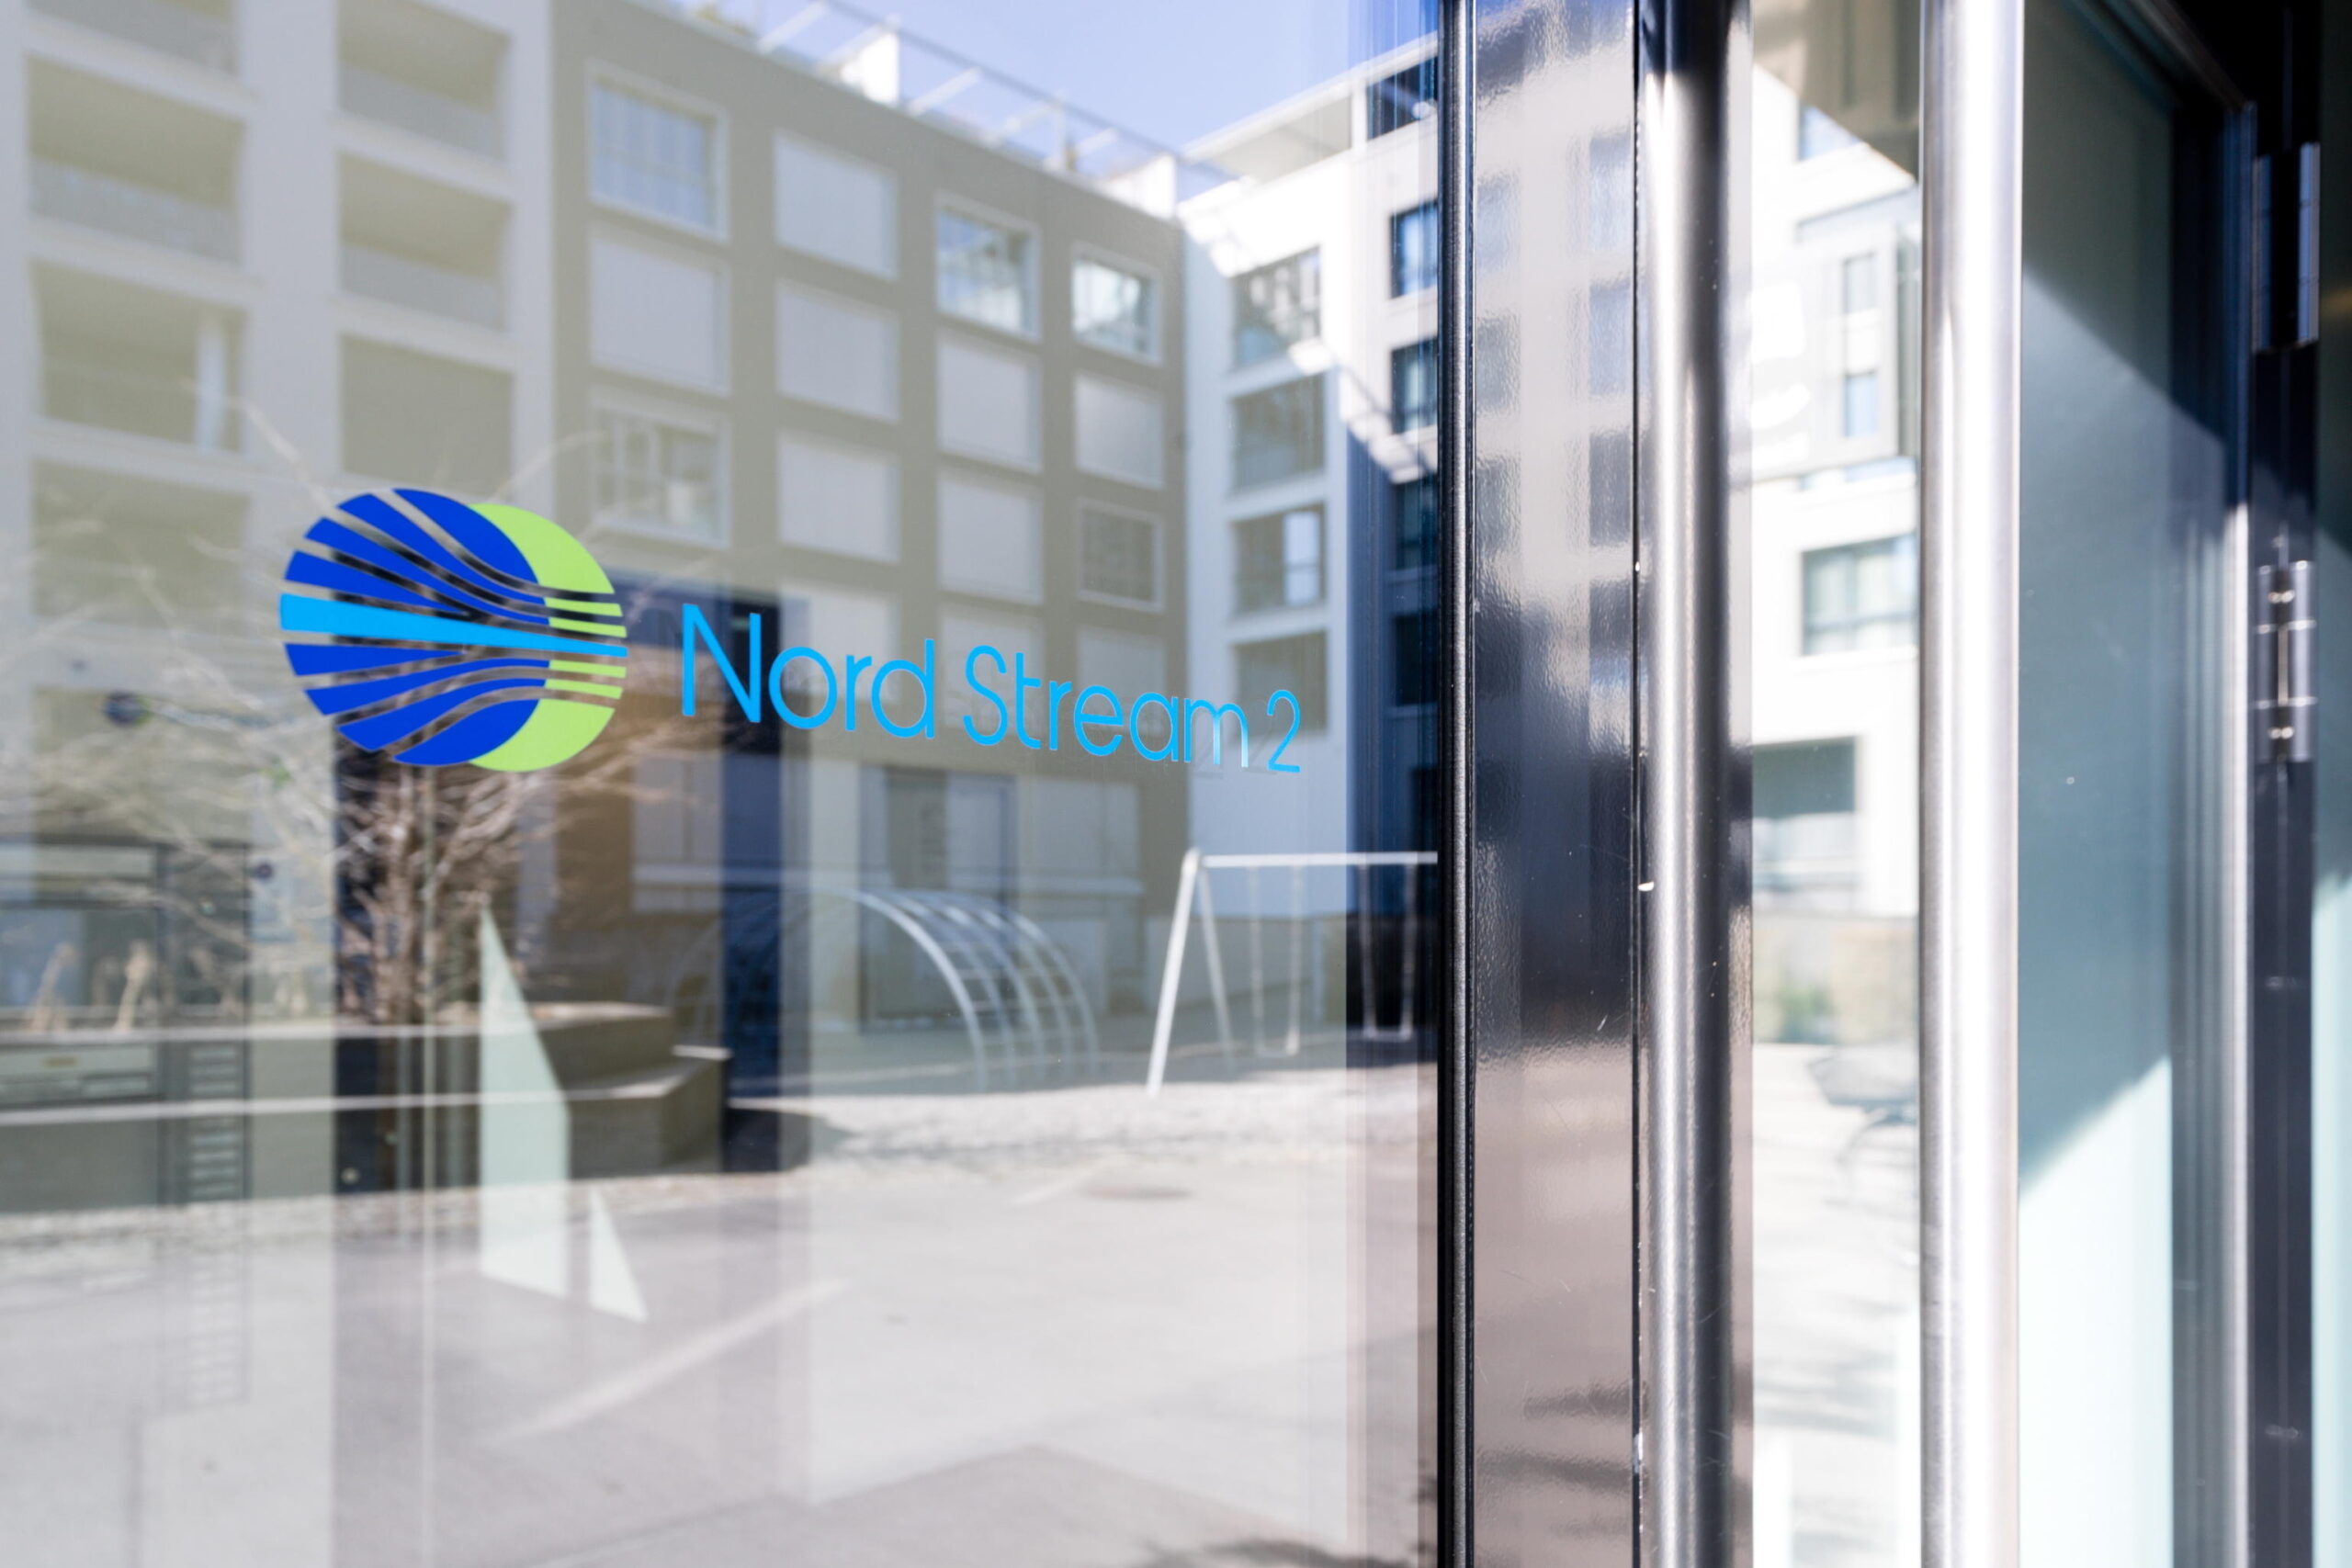 epa09793324 A Nord Stream 2 logo is seen on a reflected glass front of the company's Switzerland headquarters in Zug, Switzerland, 01 March 2022. Zug-based Nord Stream 2, which is implementing the gas pipeline between Russia and Germany, has carried out a mass layoff because of the sanctions taken against Russia. 140 people have lost their jobs, said Swiss Federal Councillor Guy Parmelin.  EPA/PHILIPP SCHMIDLI